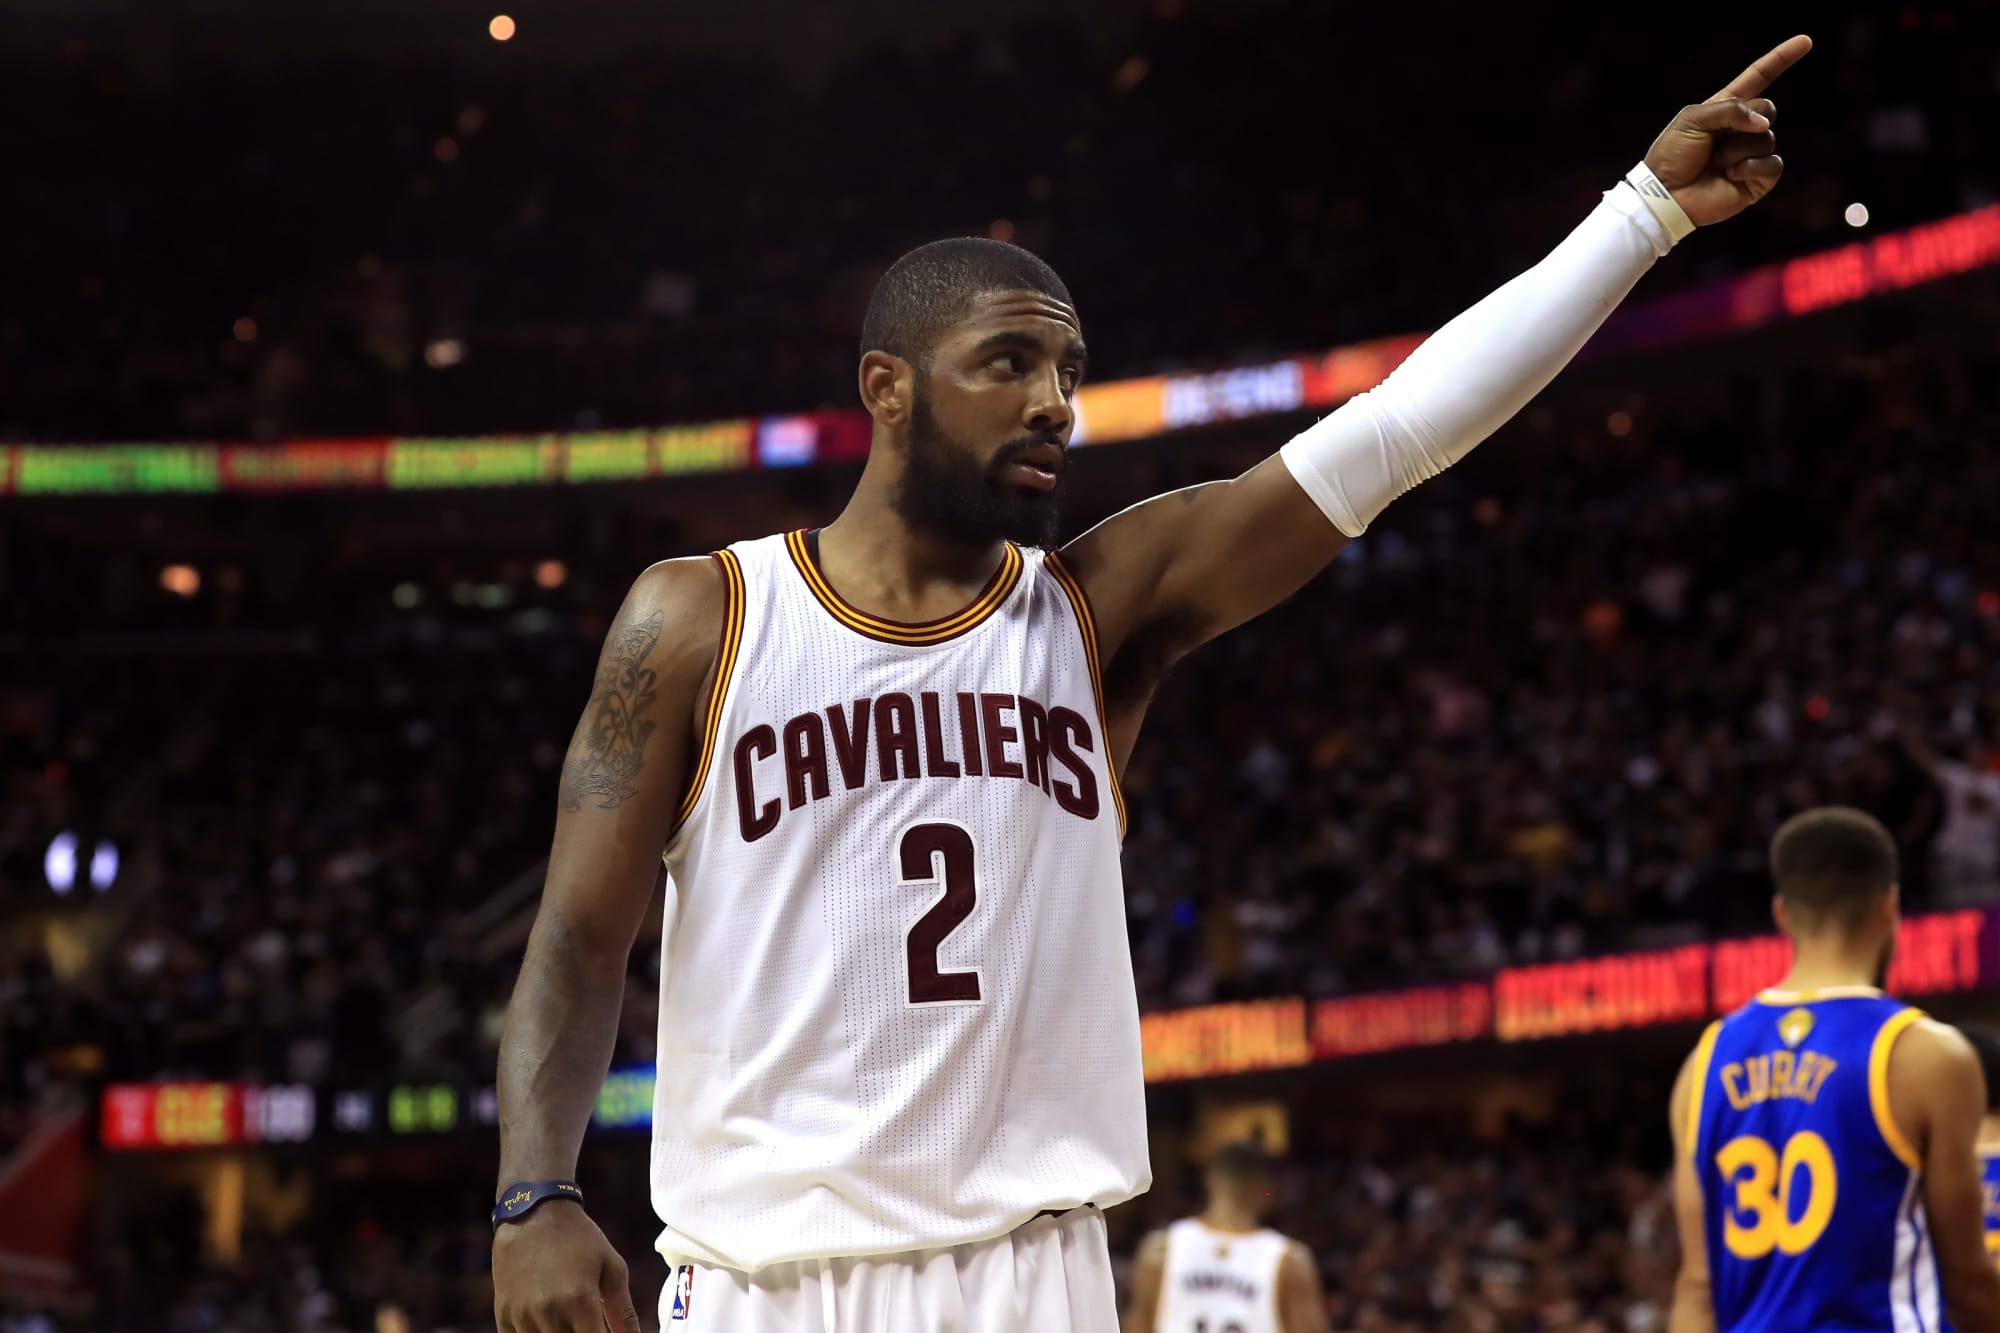 Kyrie Irving Wants His Jersey Retired by the Boston Celtics